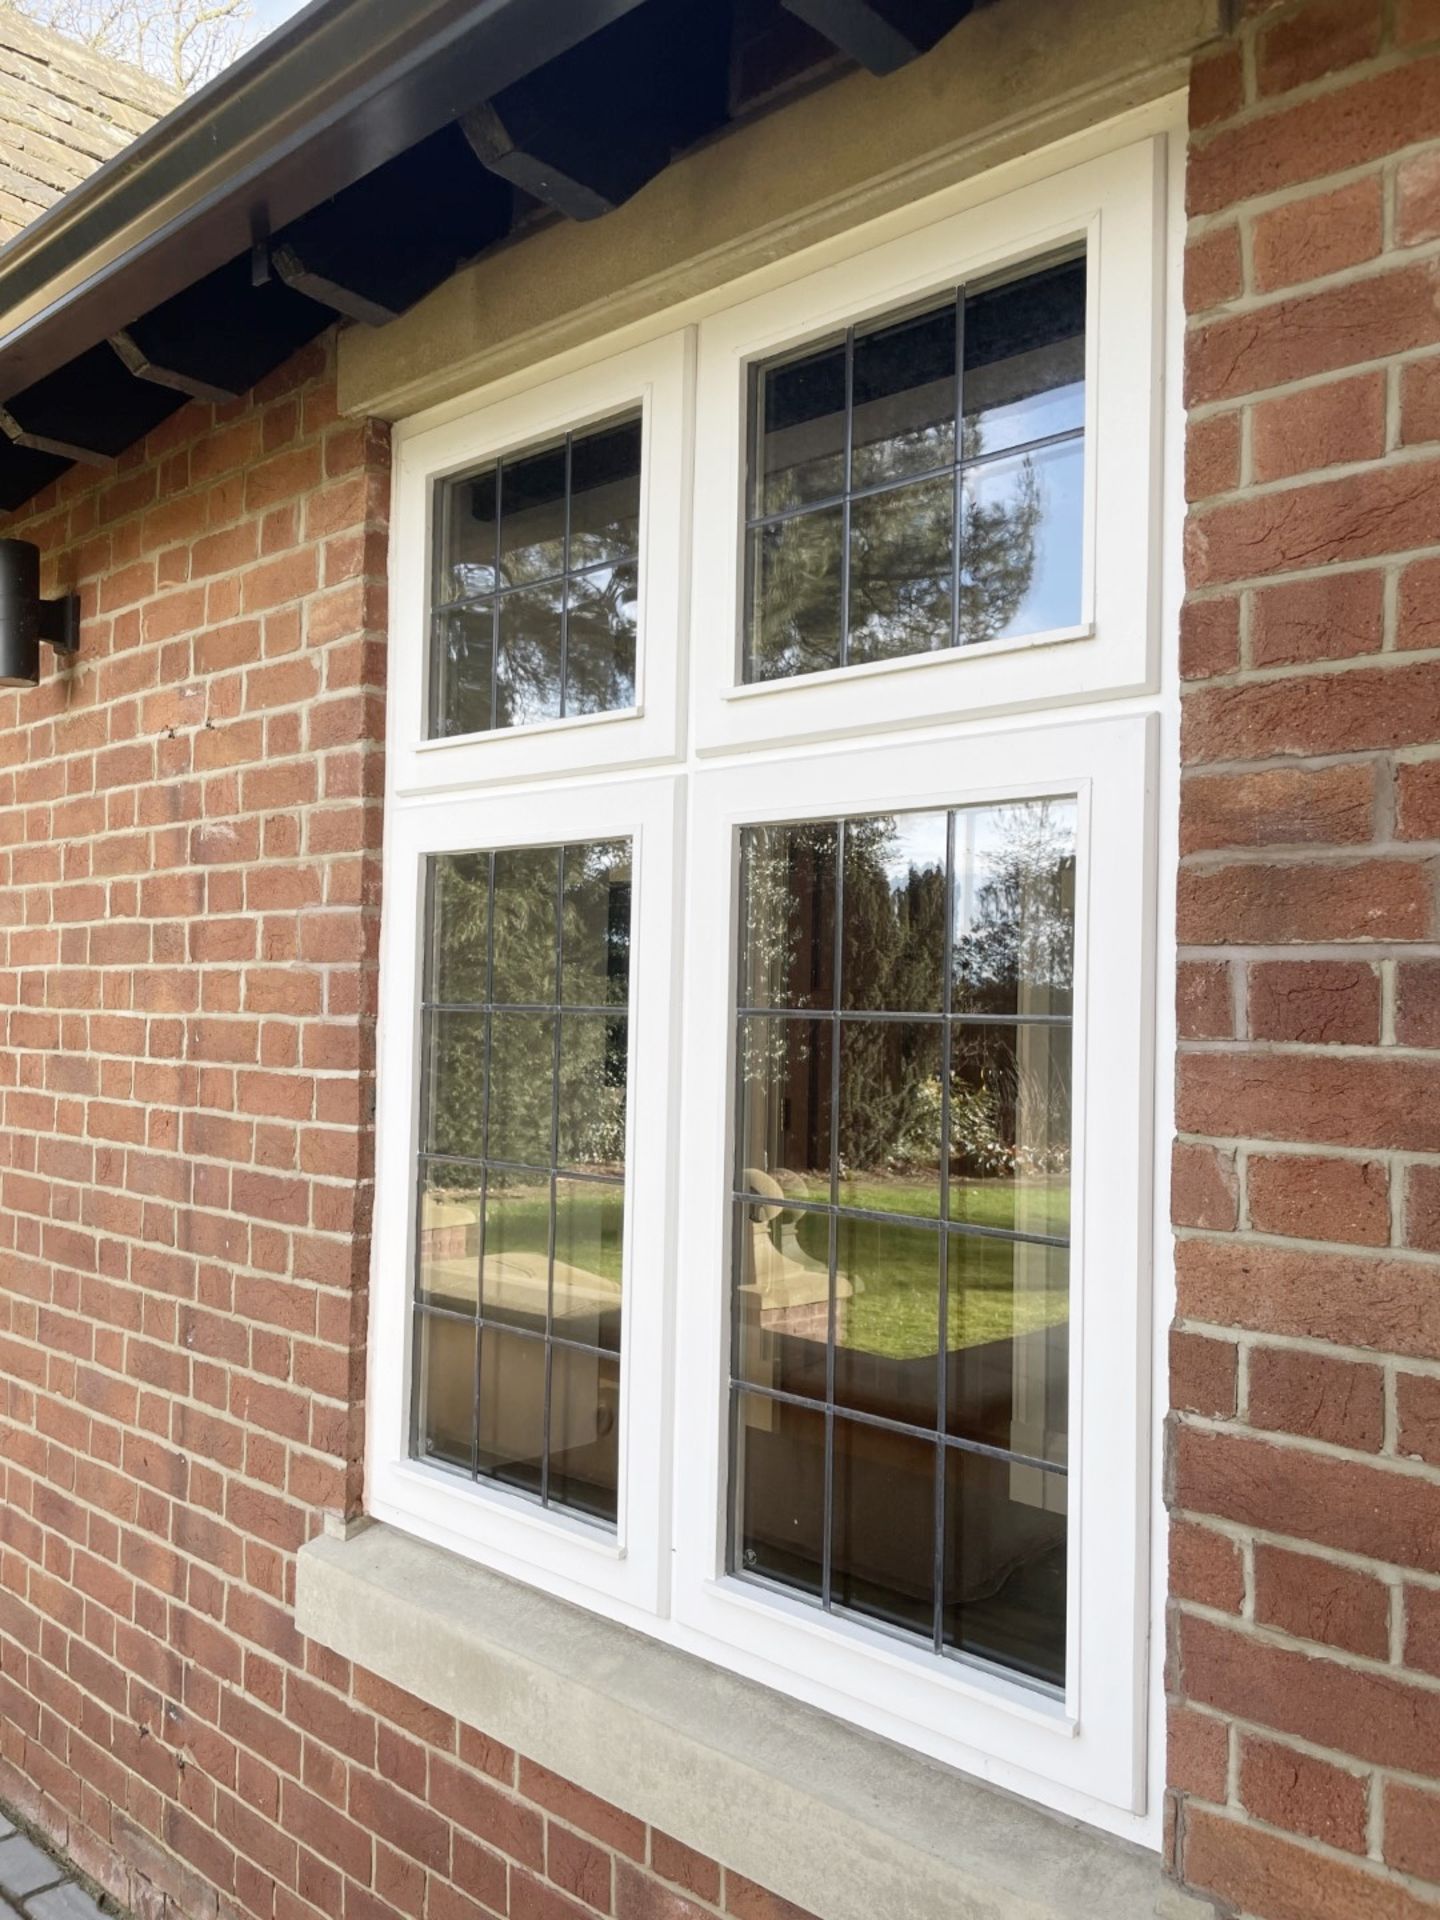 1 x Hardwood Timber Double Glazed Window Frame - Ref: PAN208 - CL896 - NO VAT ON THE HAMMER - - Image 2 of 15